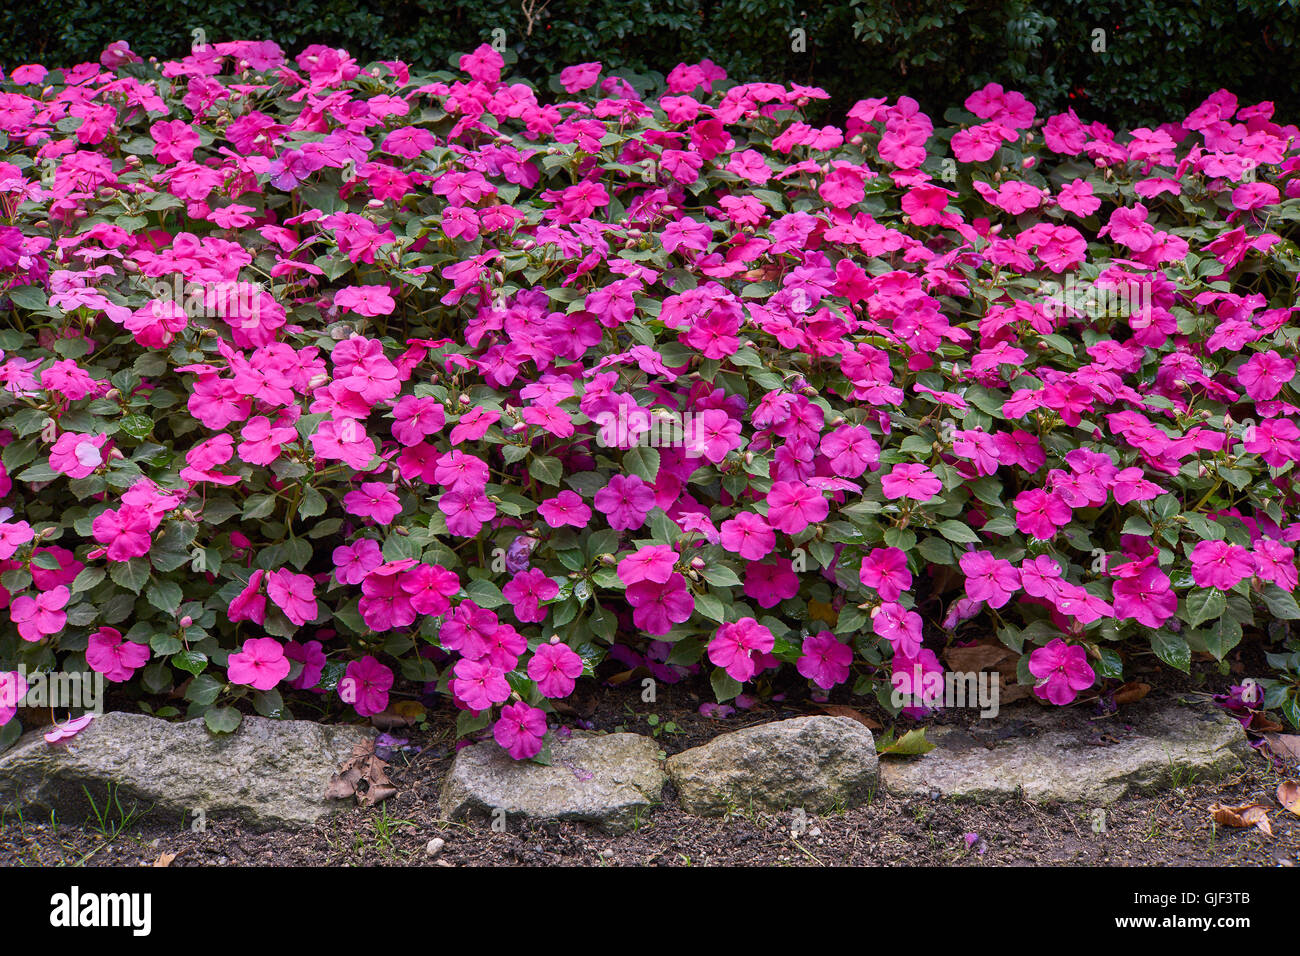 Impatiens Walleriana Lots Of Purple Pink Flowers On The Flower Bed Stock Photo Alamy